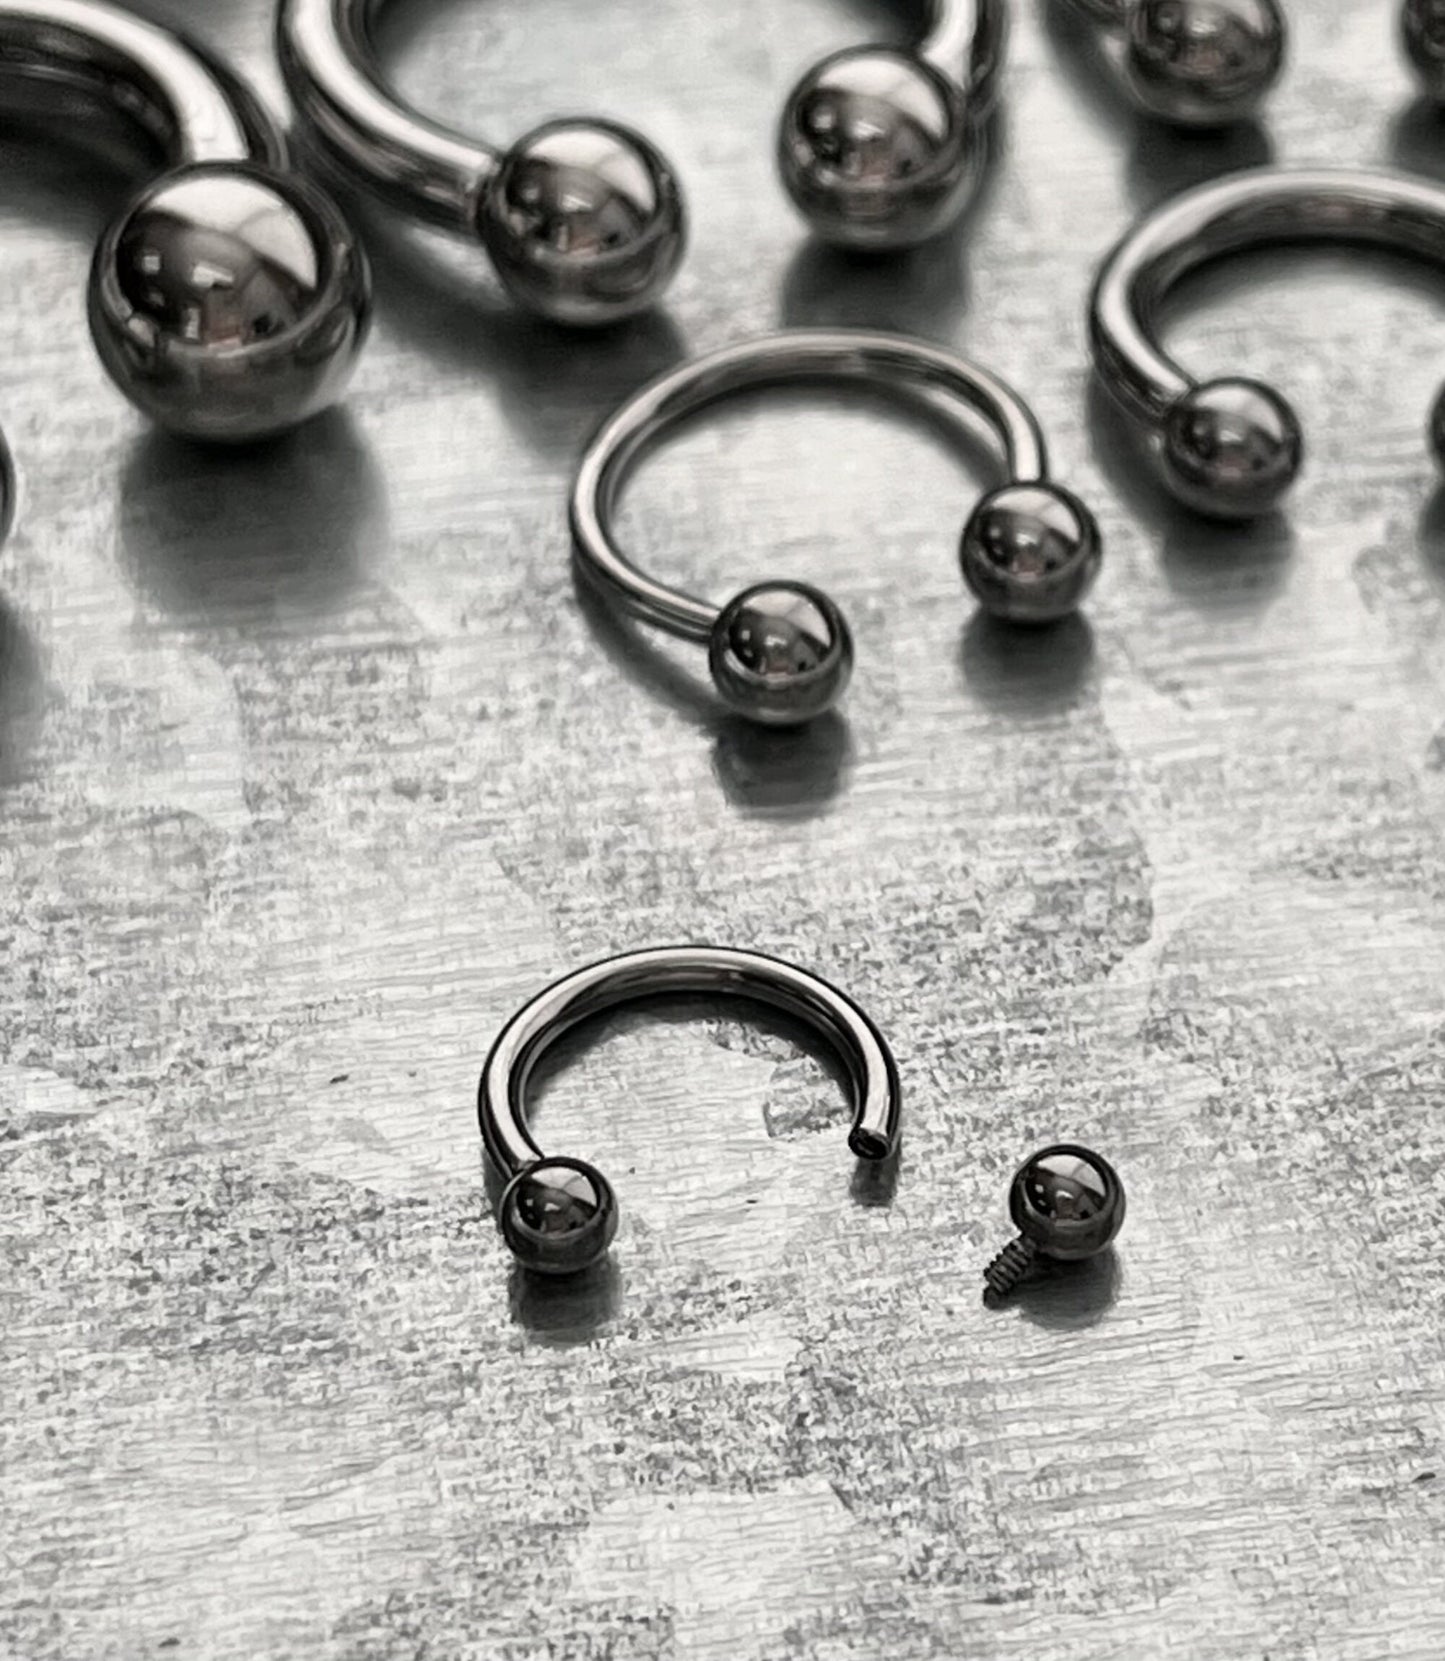 1 Piece Steel Circular Barbell Horseshoe Ring - 16g, 14g, 12g, 10g, 8g, 6g, 4g 2g, 0g, 00g with Assorted Internal Diameter and Ball Size!!